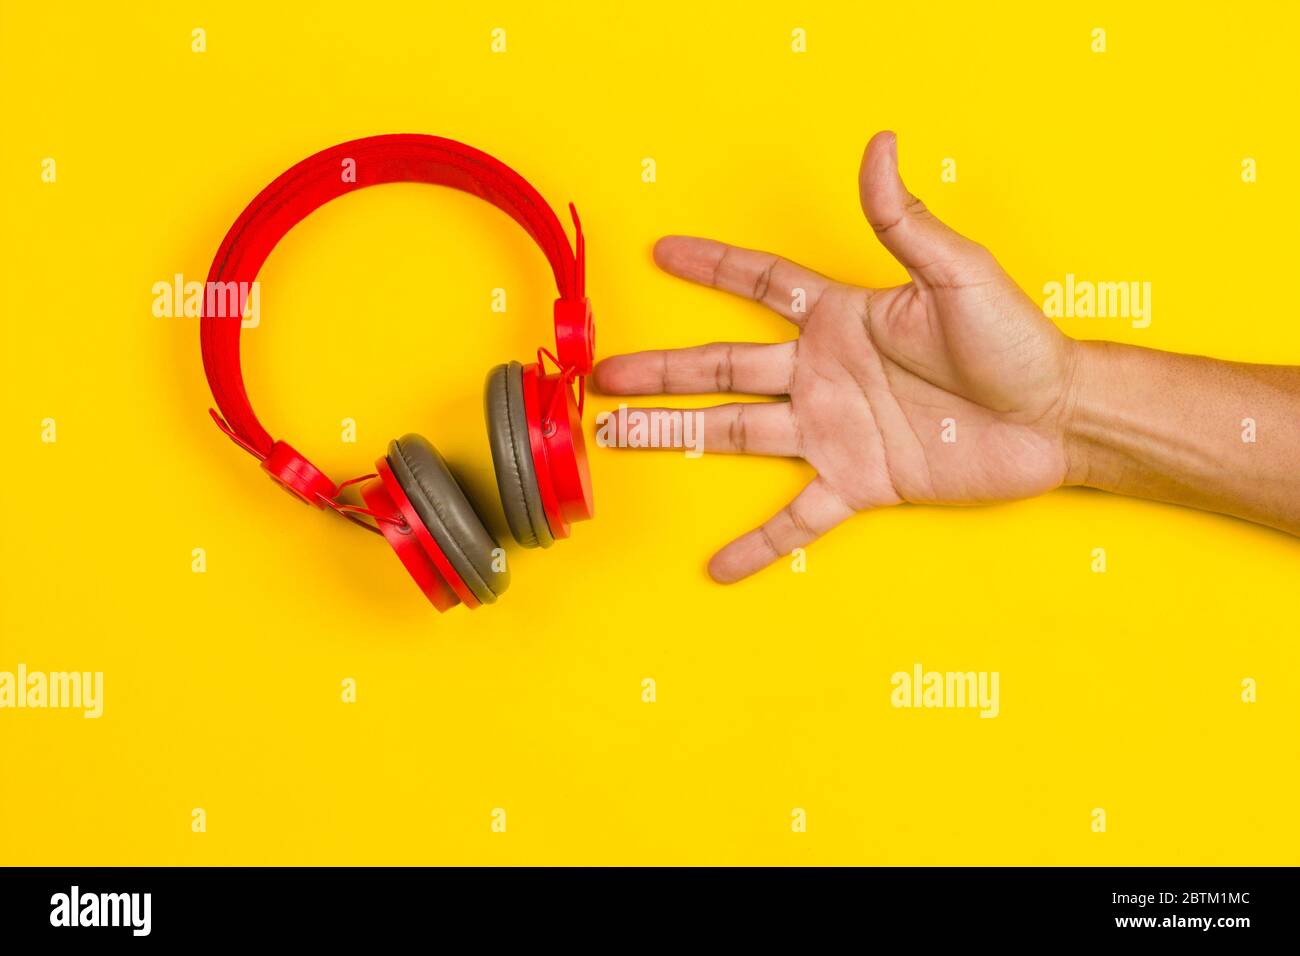 hand holding Red headphones on yellow background. Music concept Stock Photo